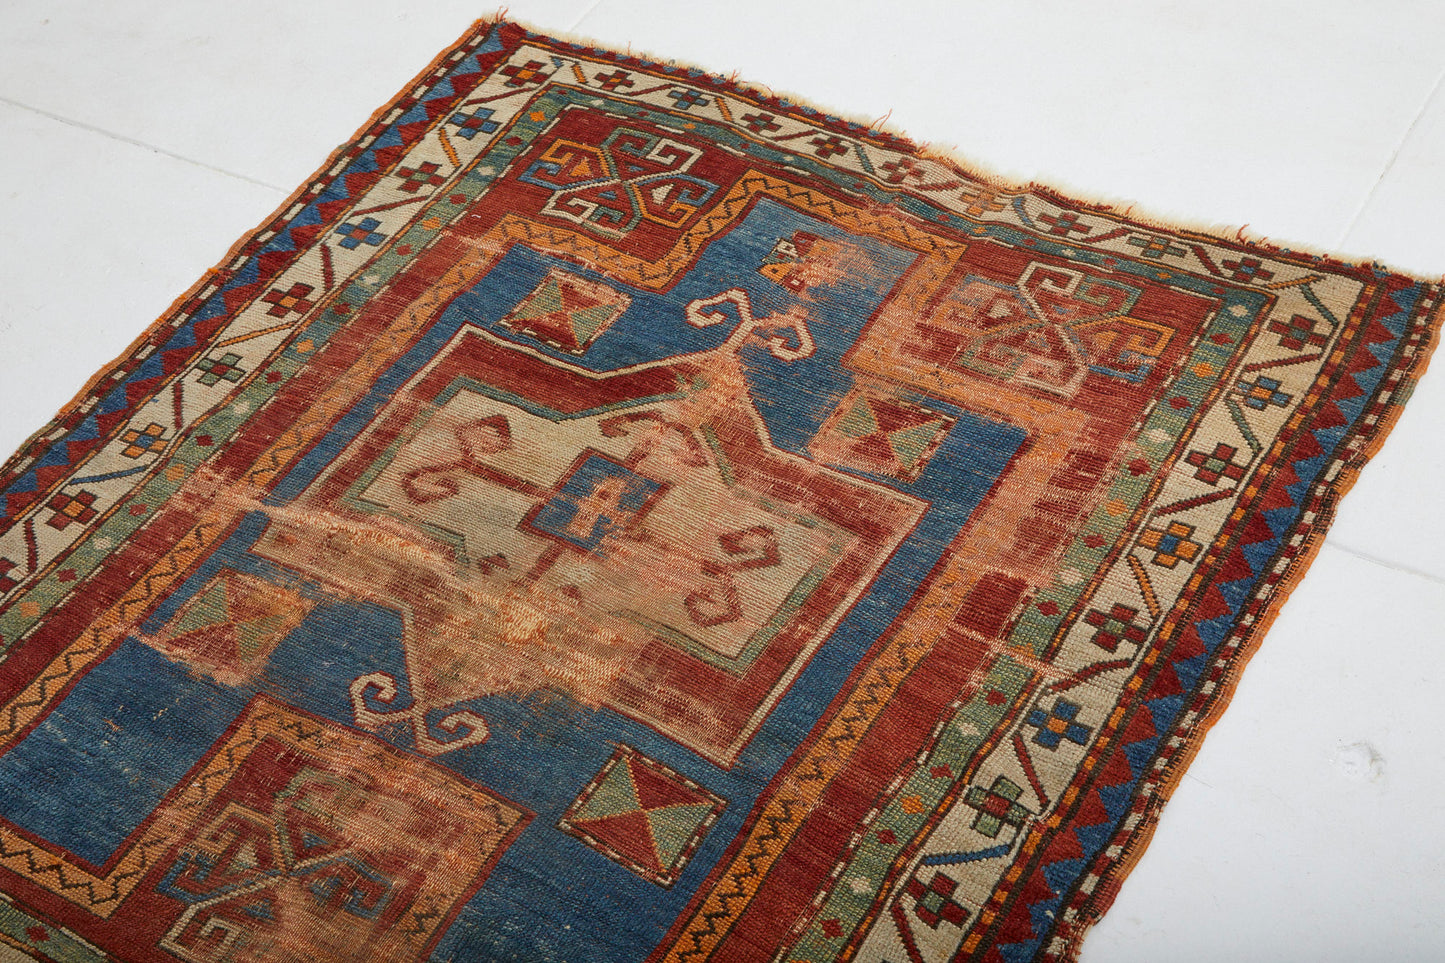 Antique hand woven Kazak Persian Rug with red, tan, blue and cream colors - Available from King Kennedy Rugs Los Angeles